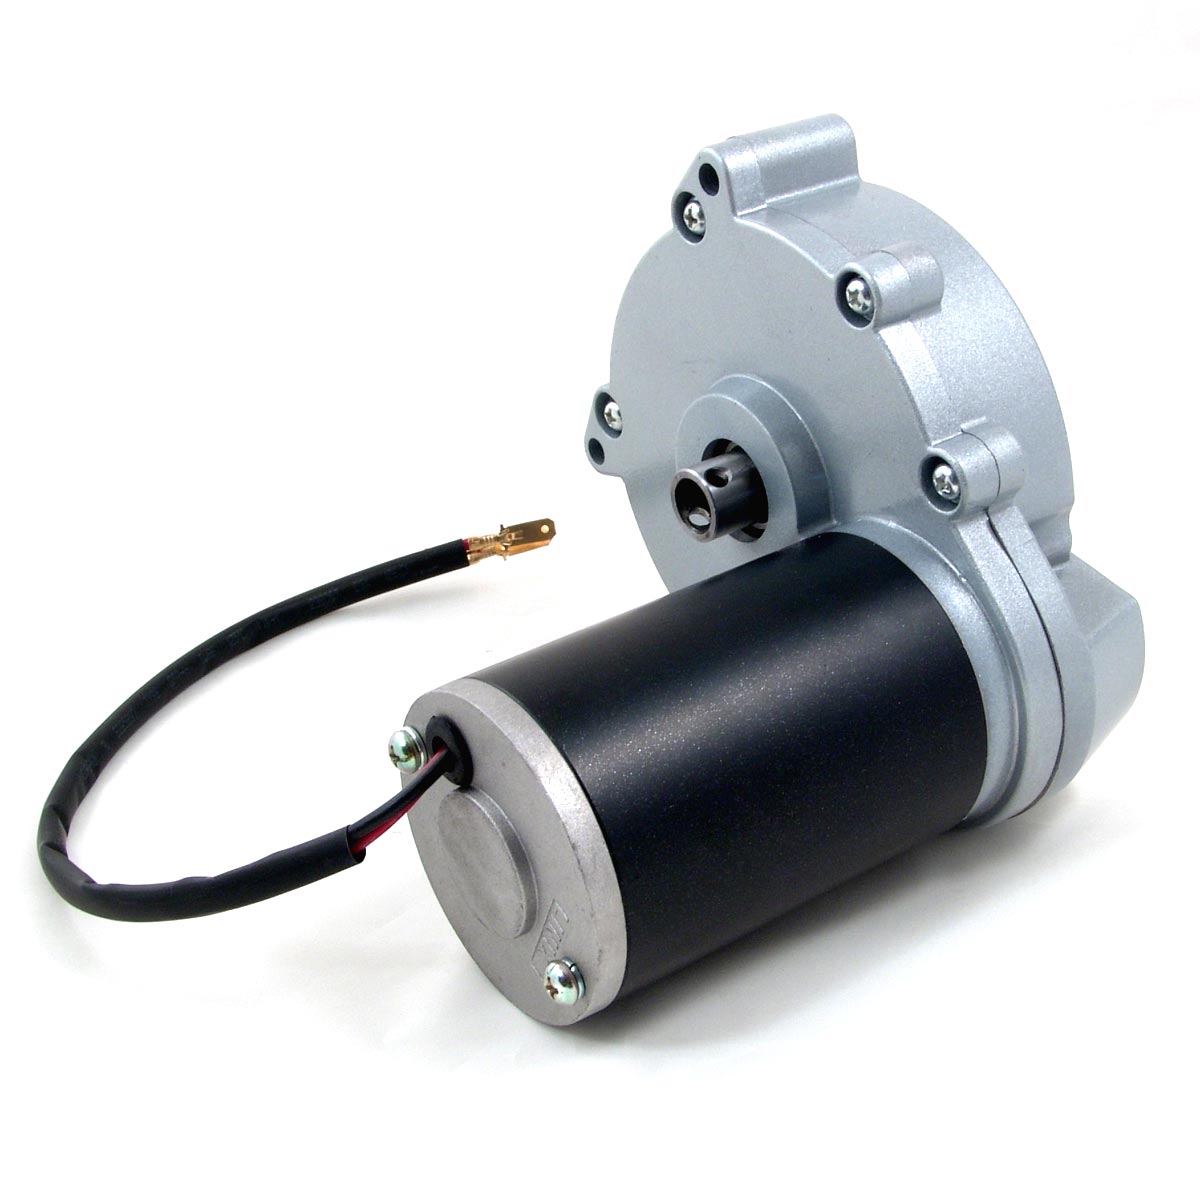 12V DC Motor with Gear Box Assembly for P1D3